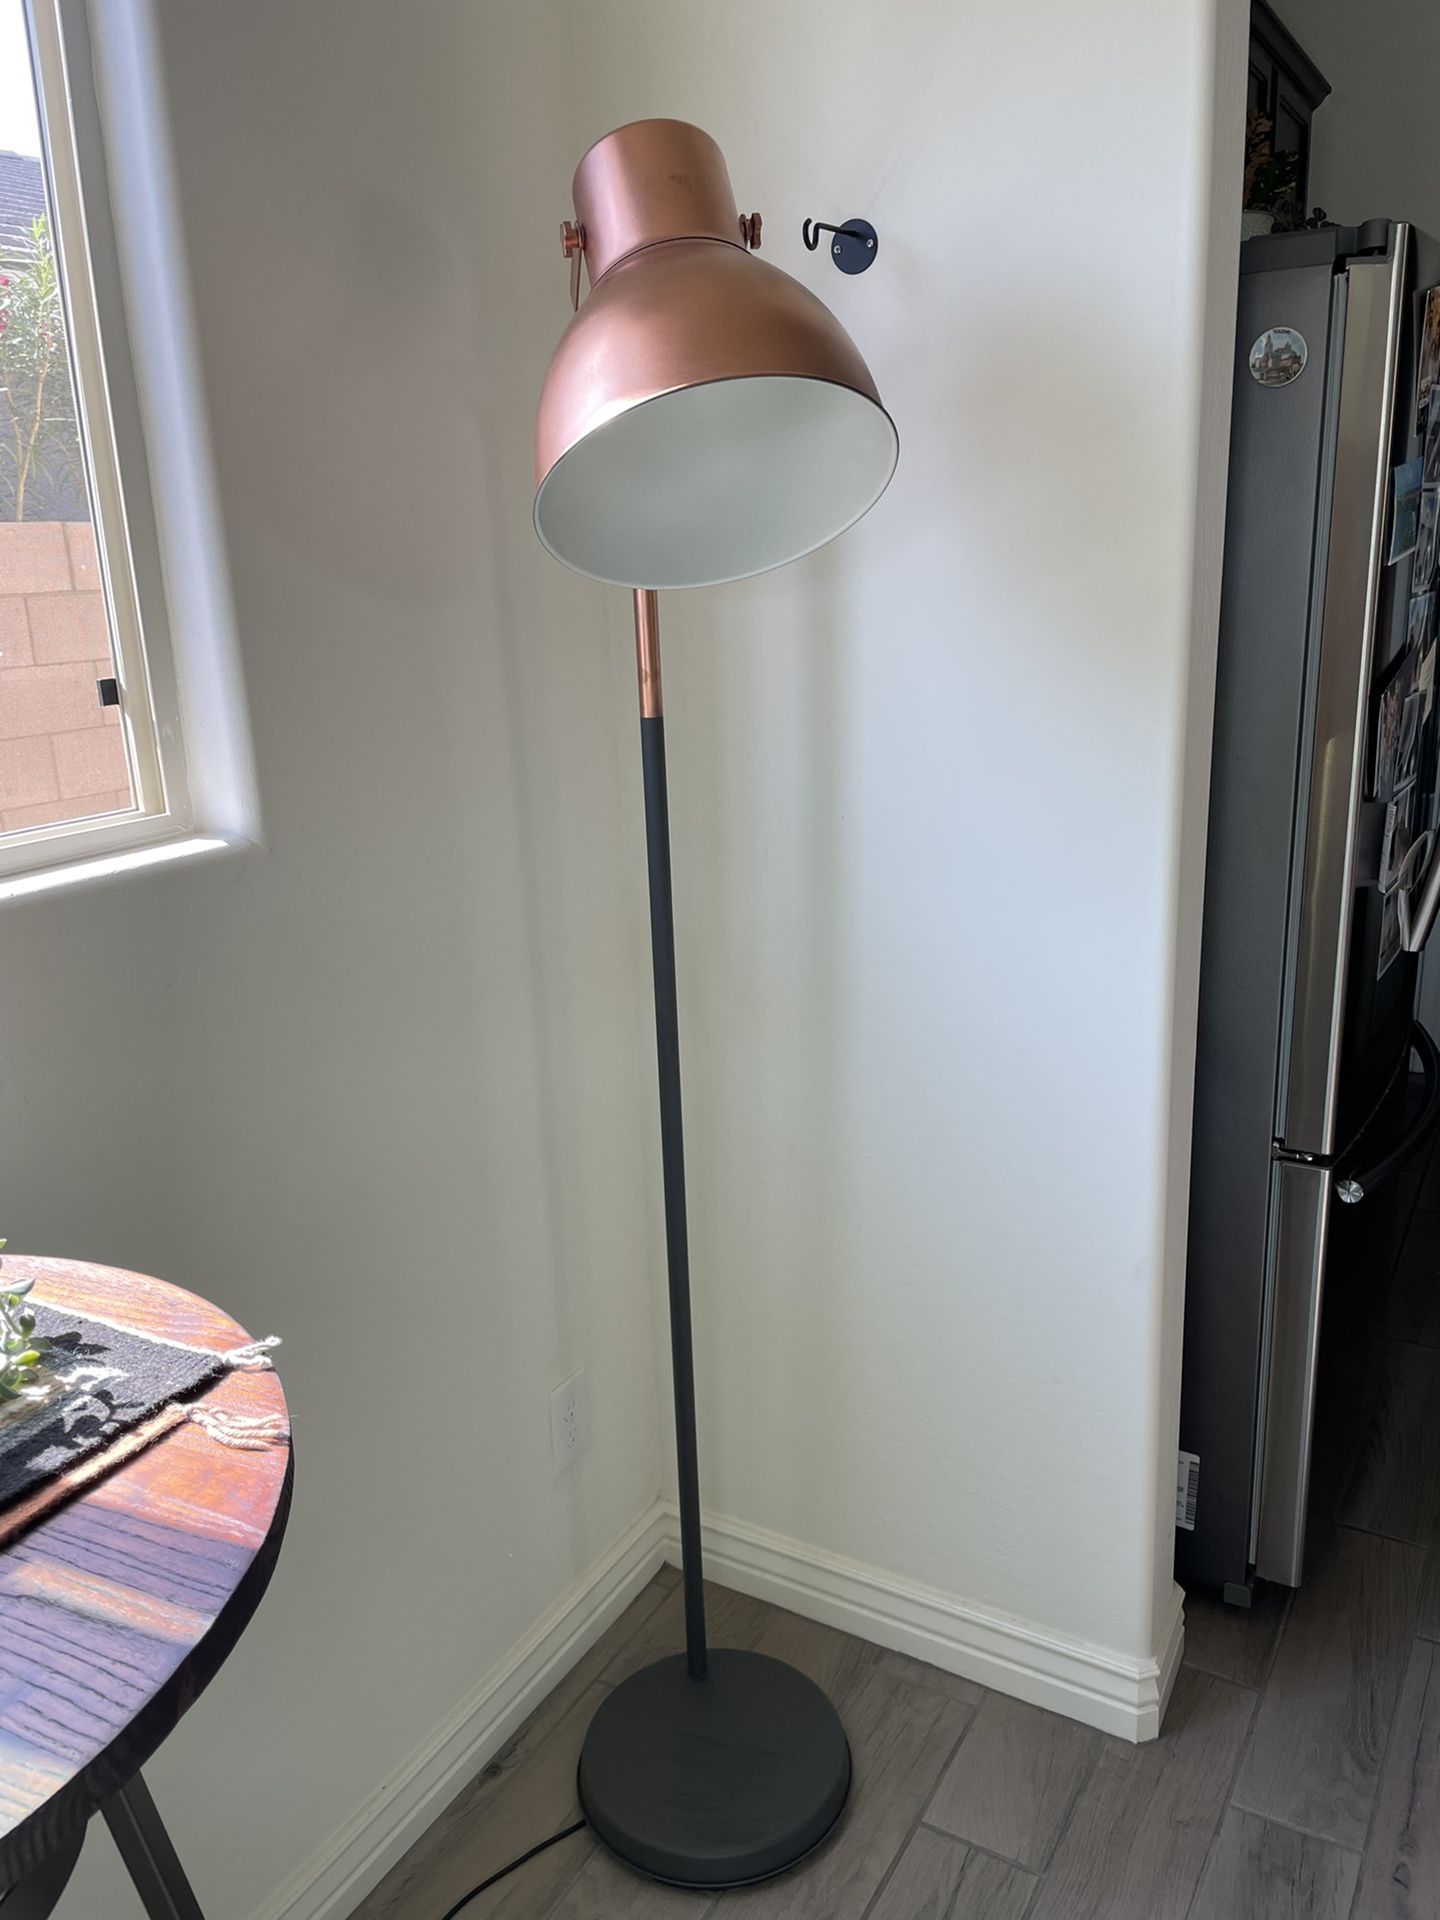 IKEA Hektar Floor Lamp - Custom Painted - Copper Paint Accent - Black - Barely Used - Like New for Sale in Phoenix, AZ - OfferUp